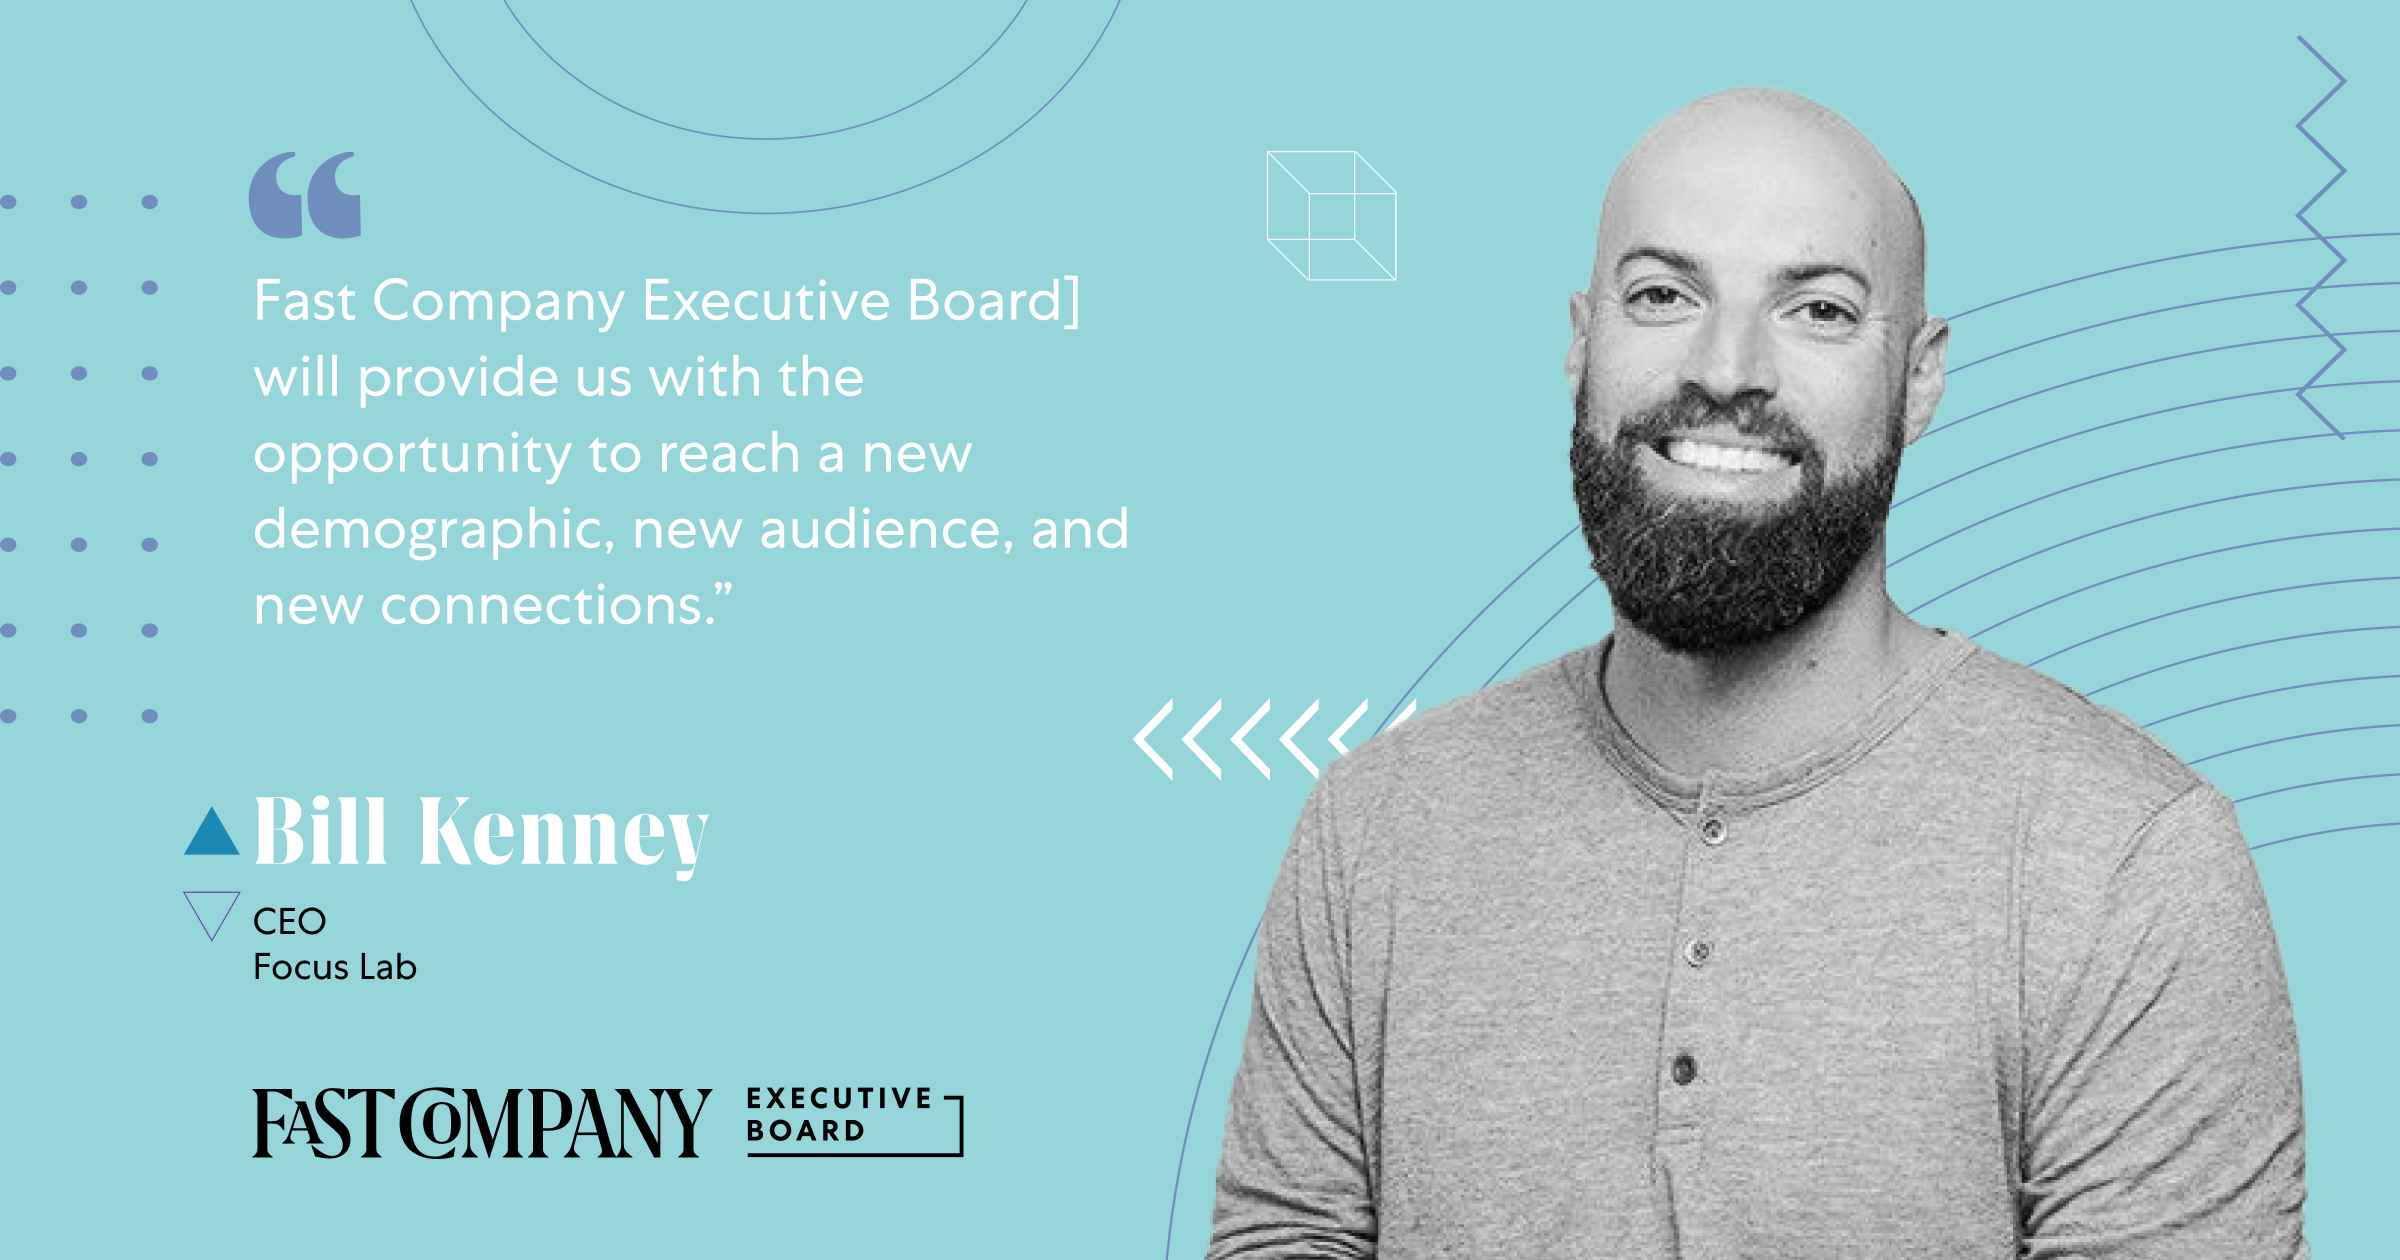 Fast Company Executive Board Provides Access to New Demographics For Bill Kenney